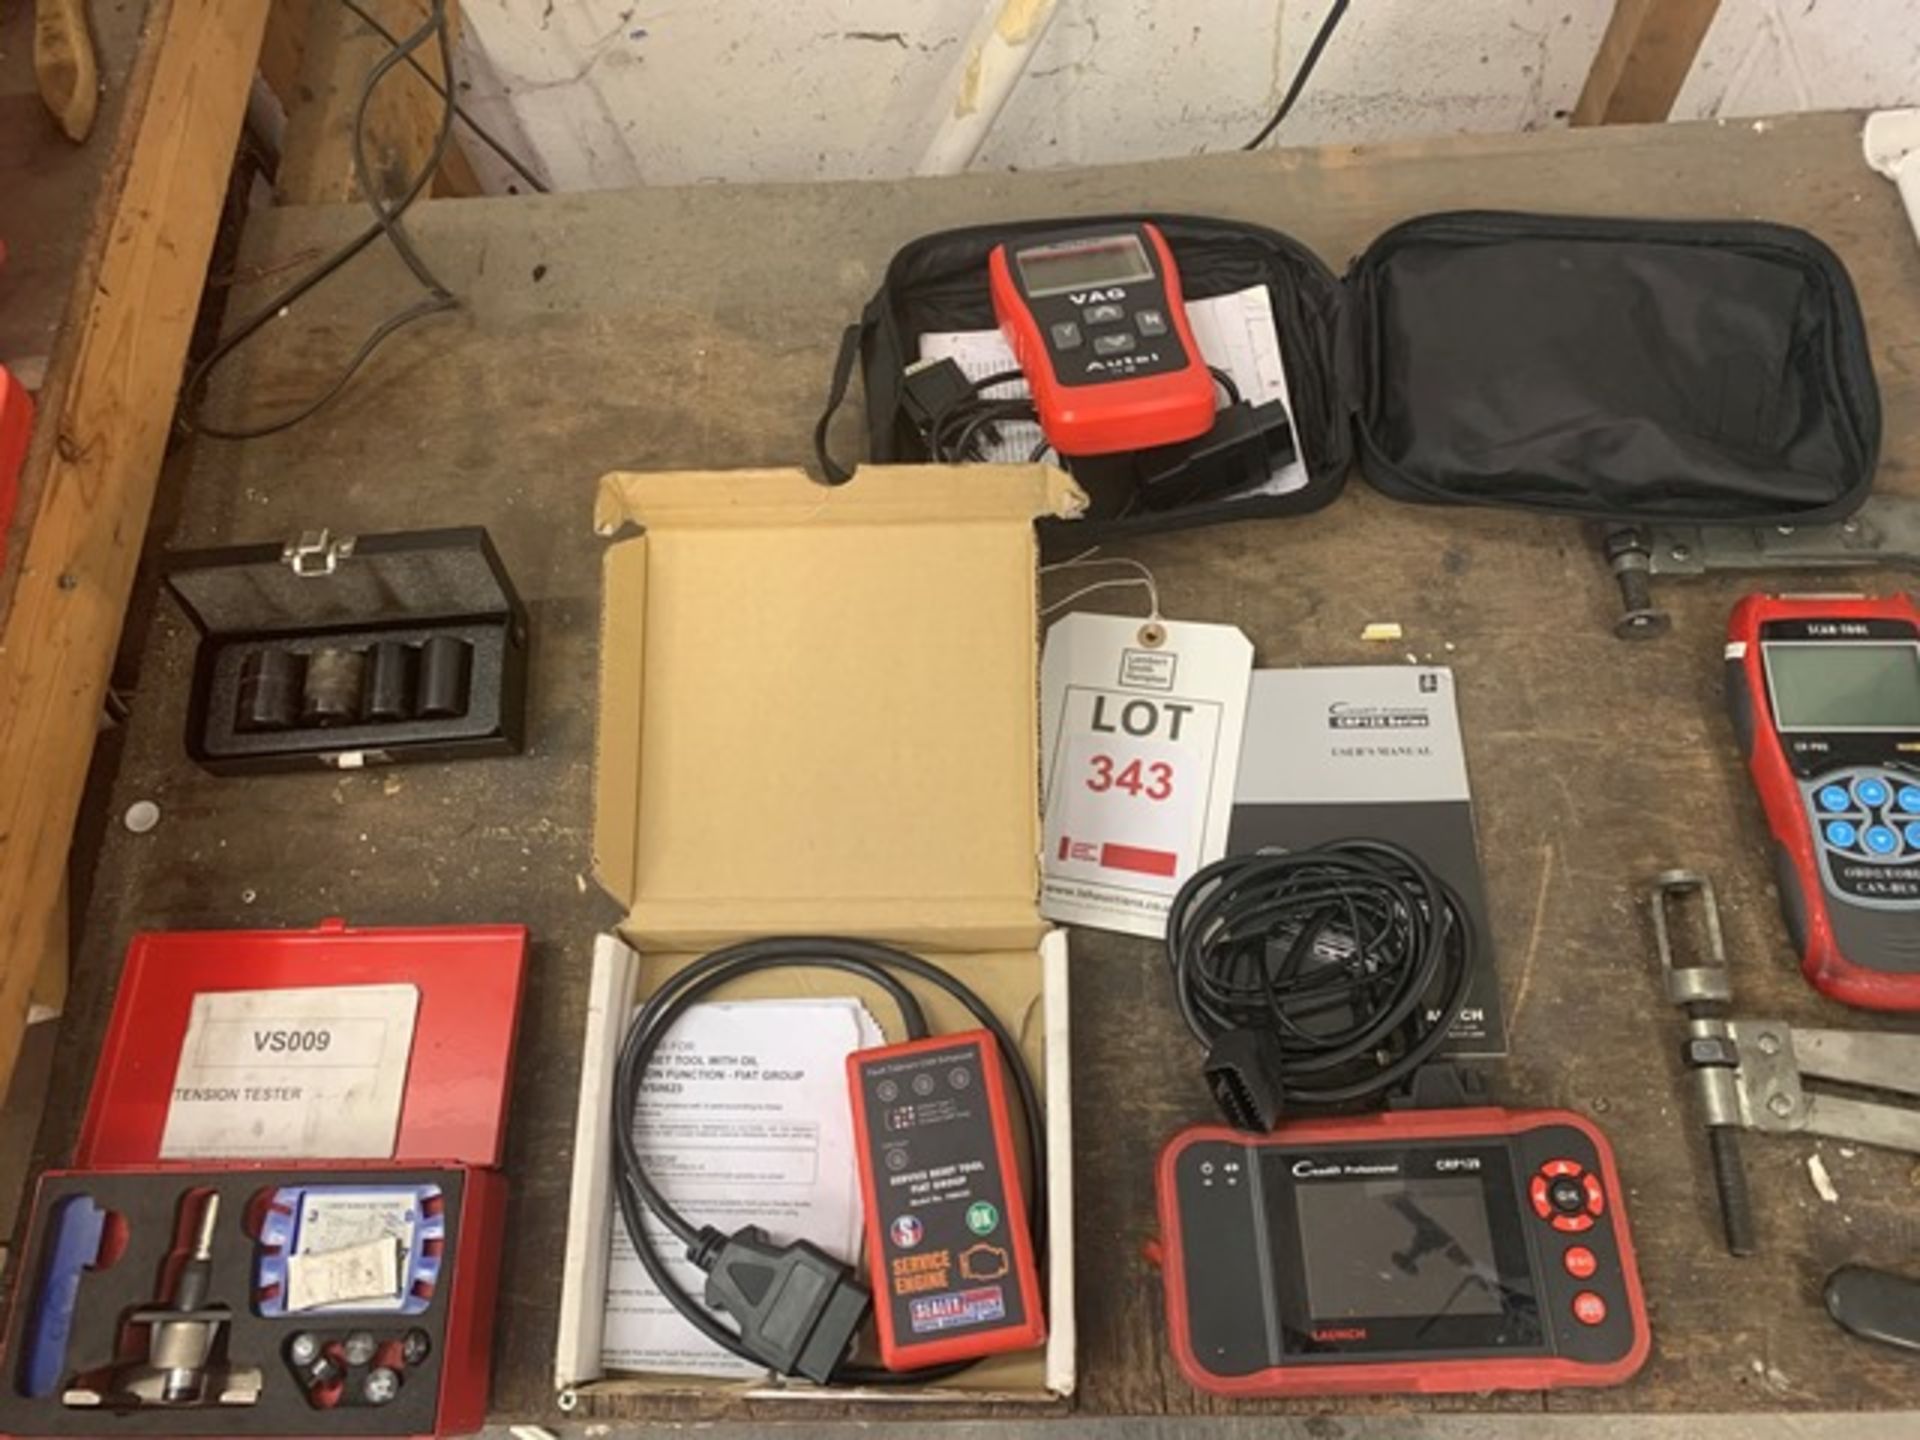 As lotted the table: Tension tester, Sealey service reset OBDI tool, Autel VAG, CR-Pro, Creader OBDI